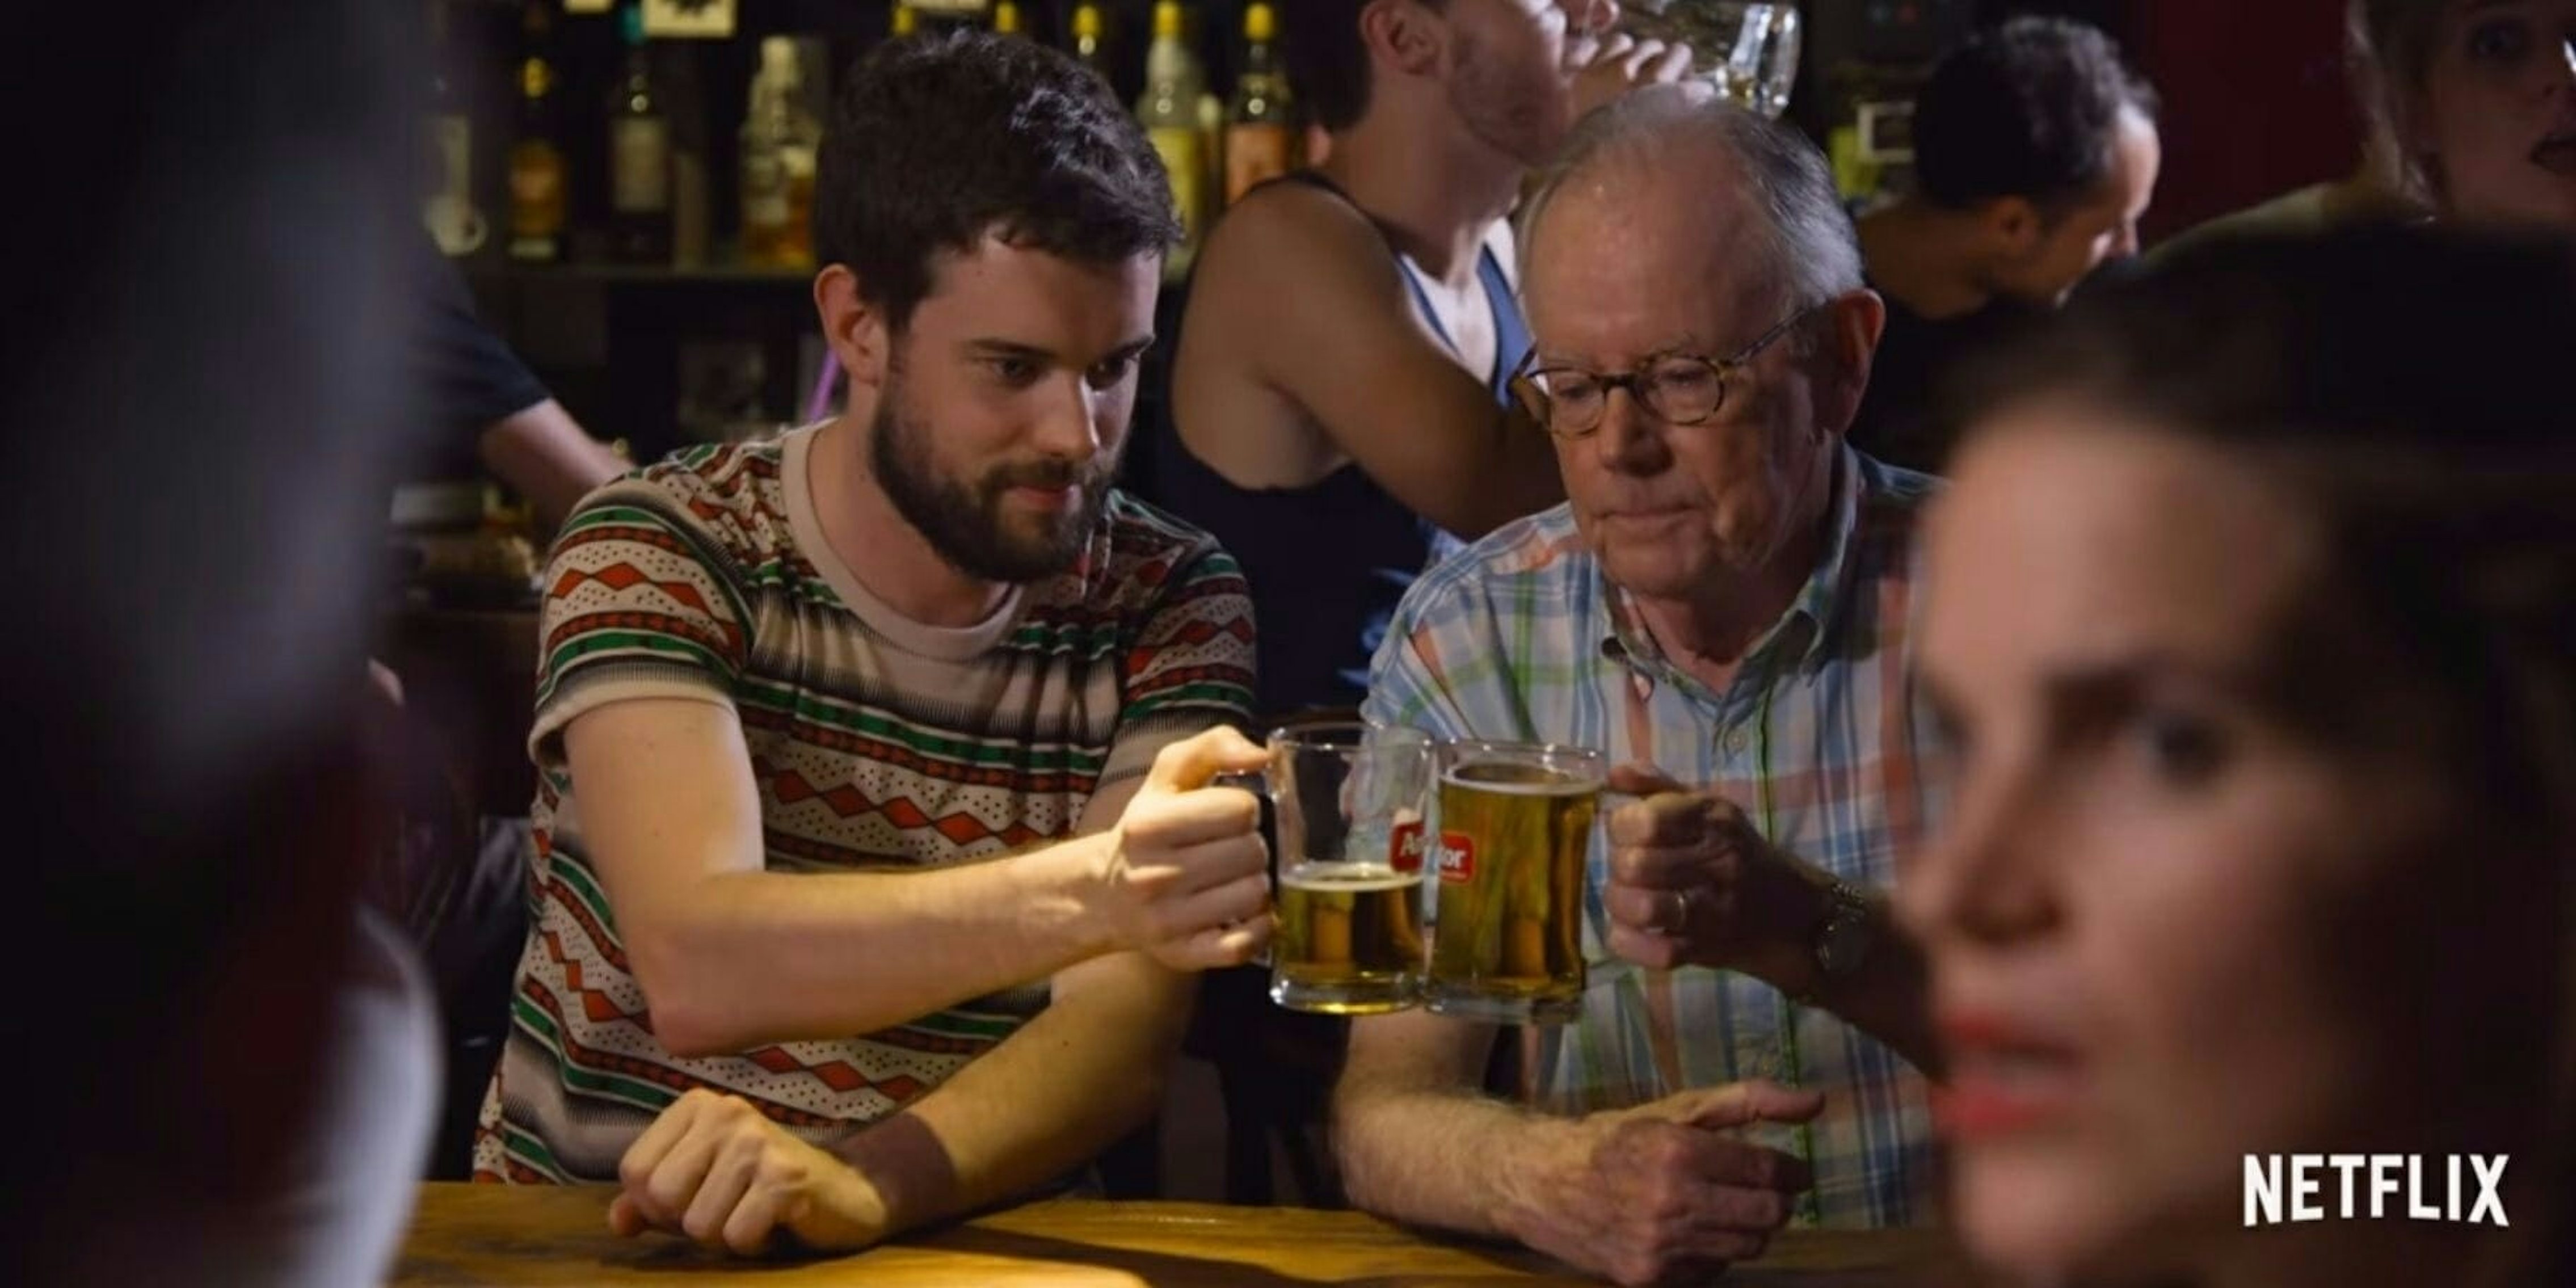 netflix docuseries Jack Whitehall Travels with My Father